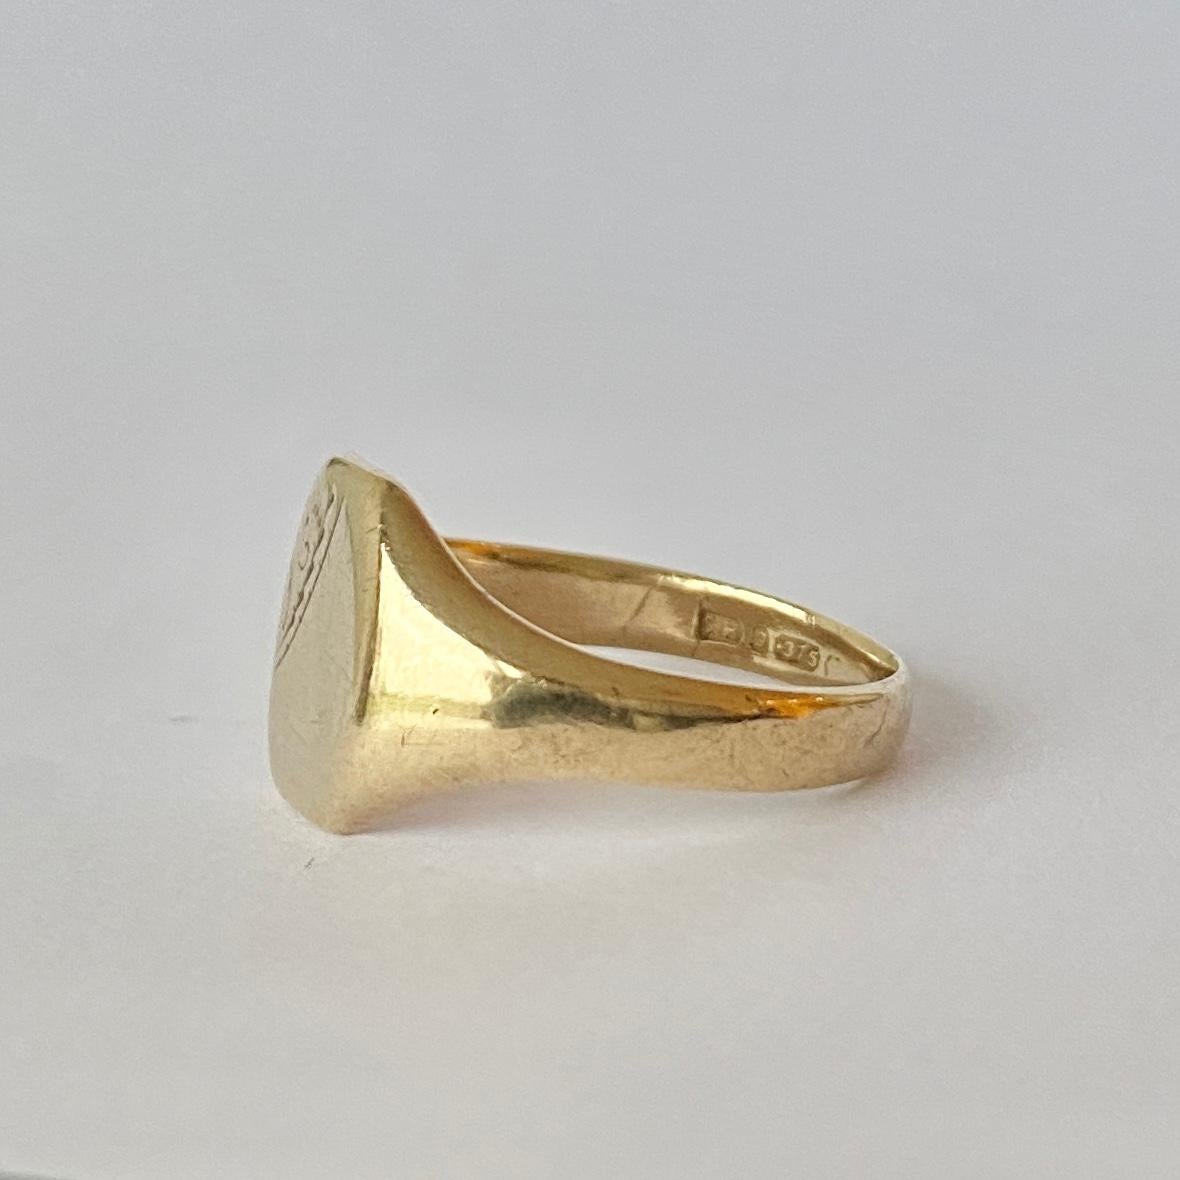 This sweet signet is modelled in 9ct gold and has a square face with half of it gently moulded with scroll detail. 

Ring Size: P 1/2 or 7 3/4 
Face Dimensions: 11x11mm 

Weight: 4.7g